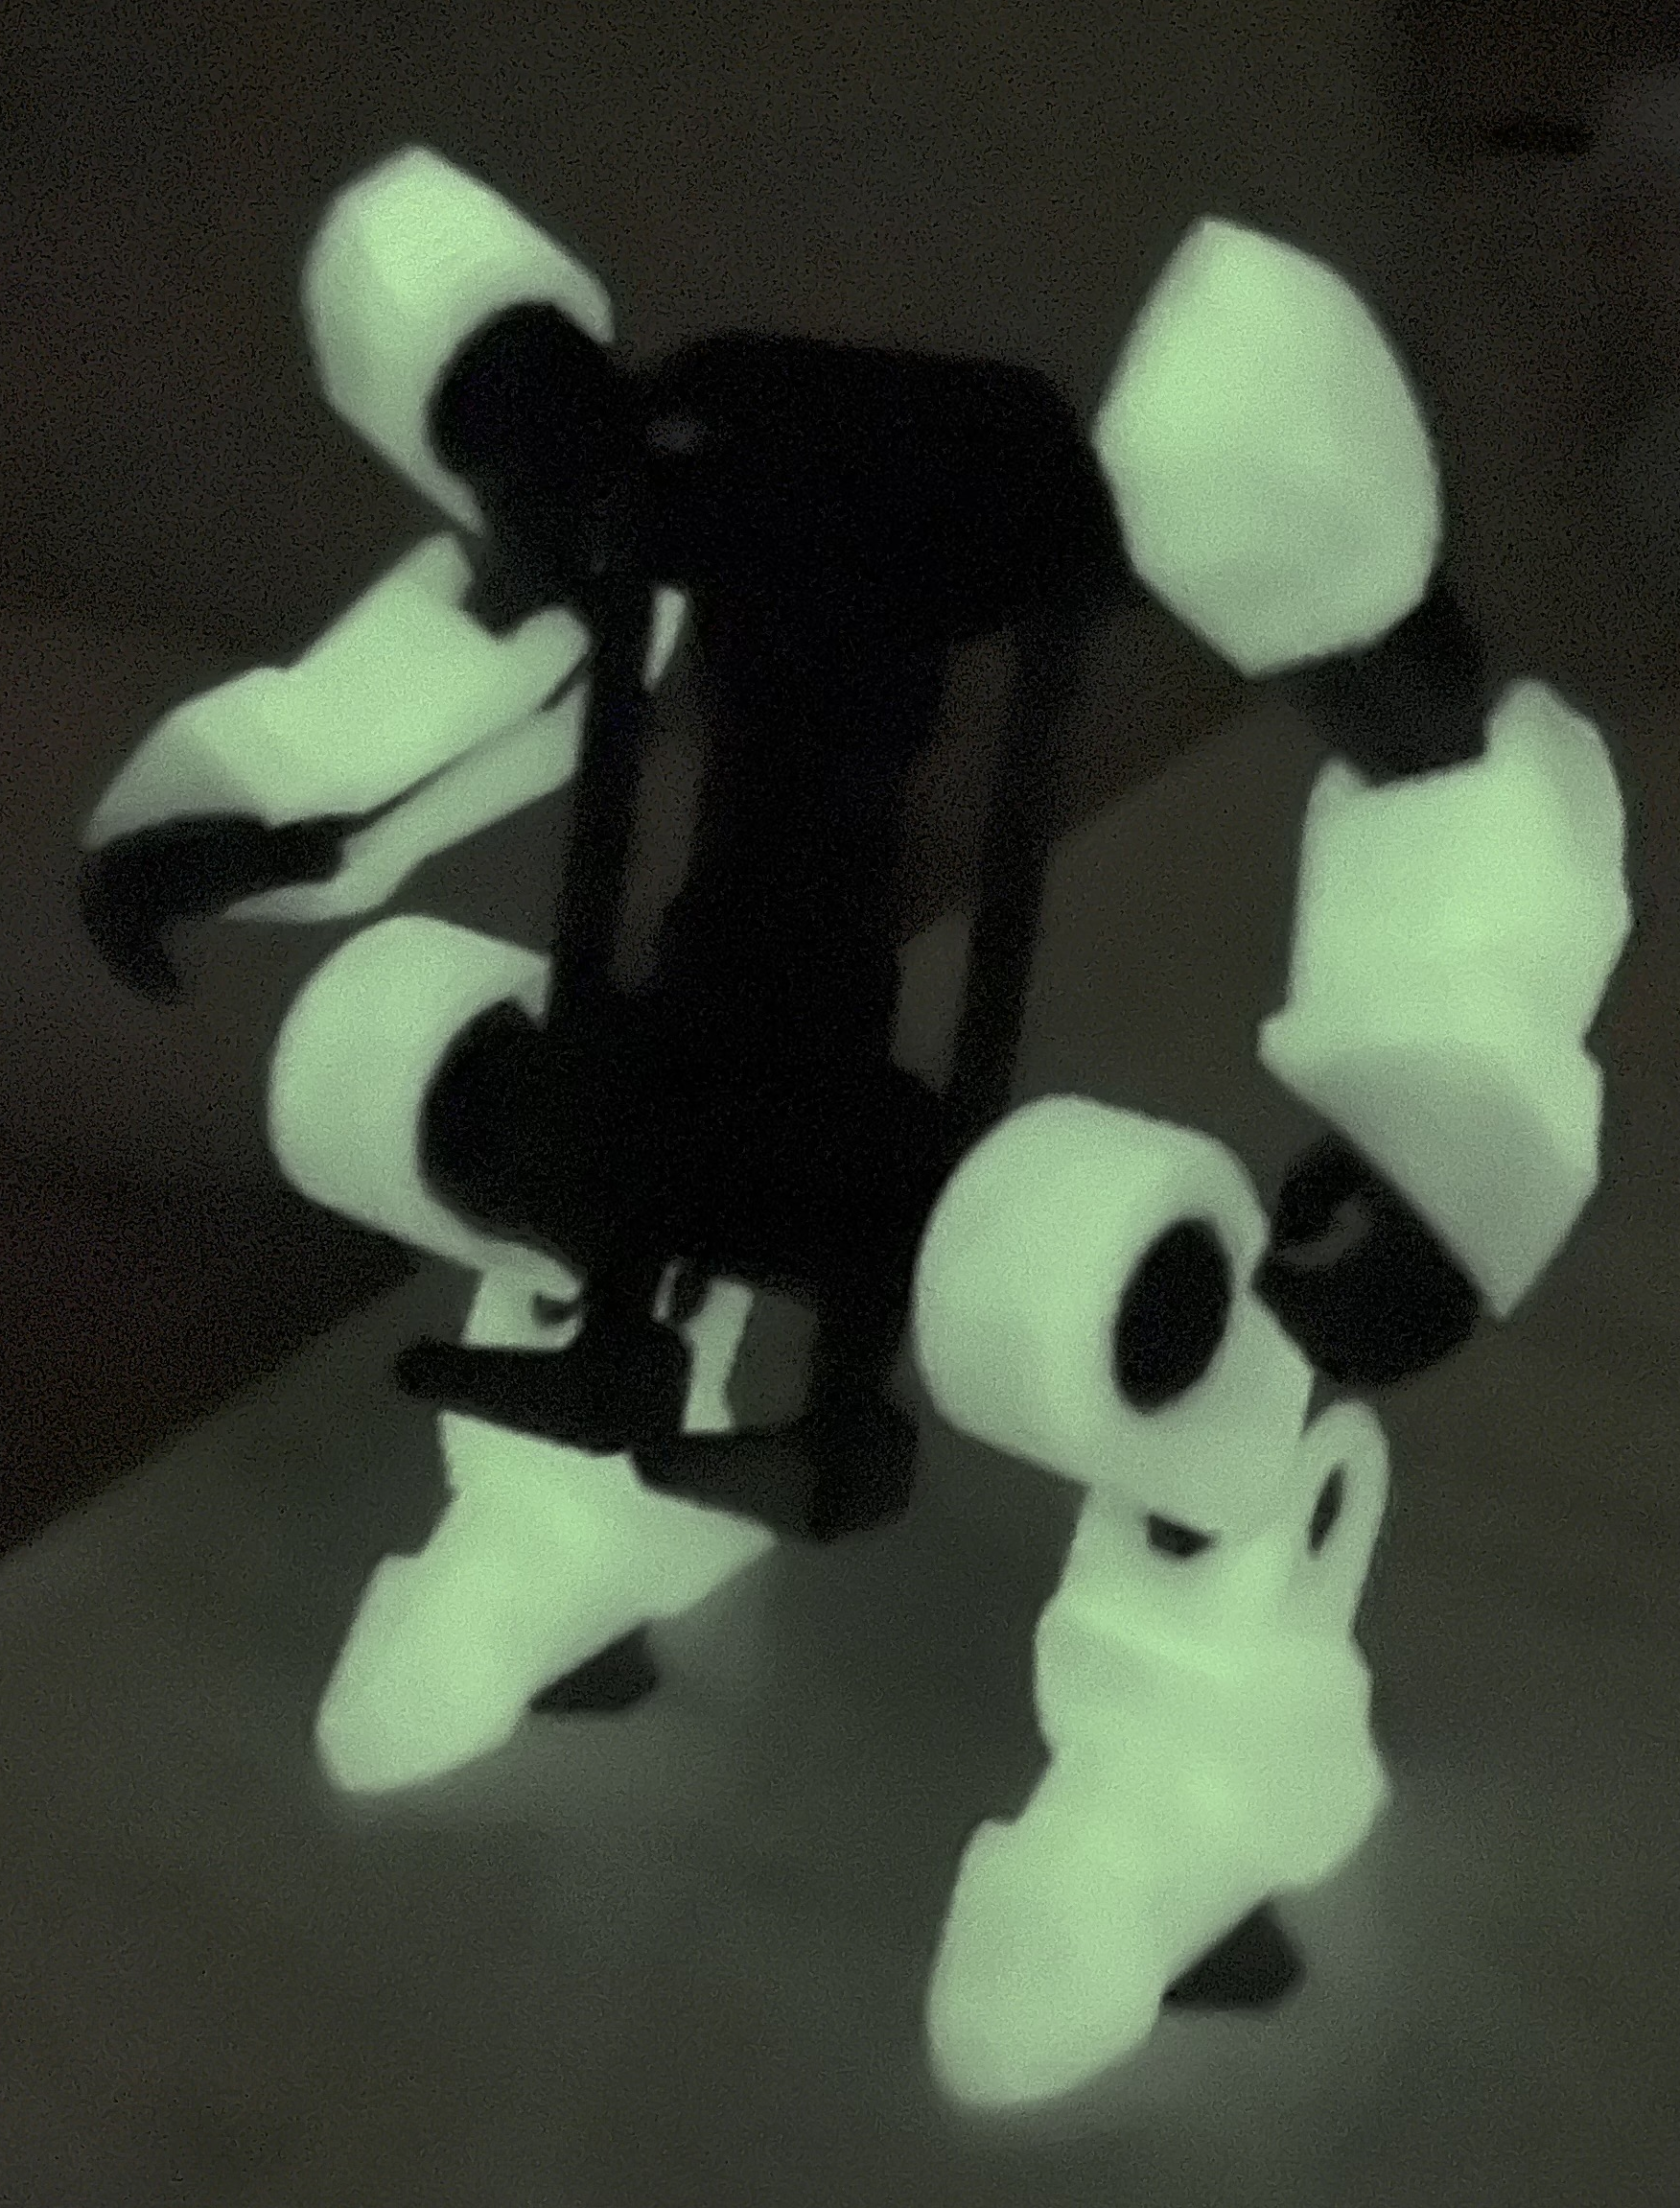 White Glow In The Dark And Galaxy Black Exo Suit Phone Holder